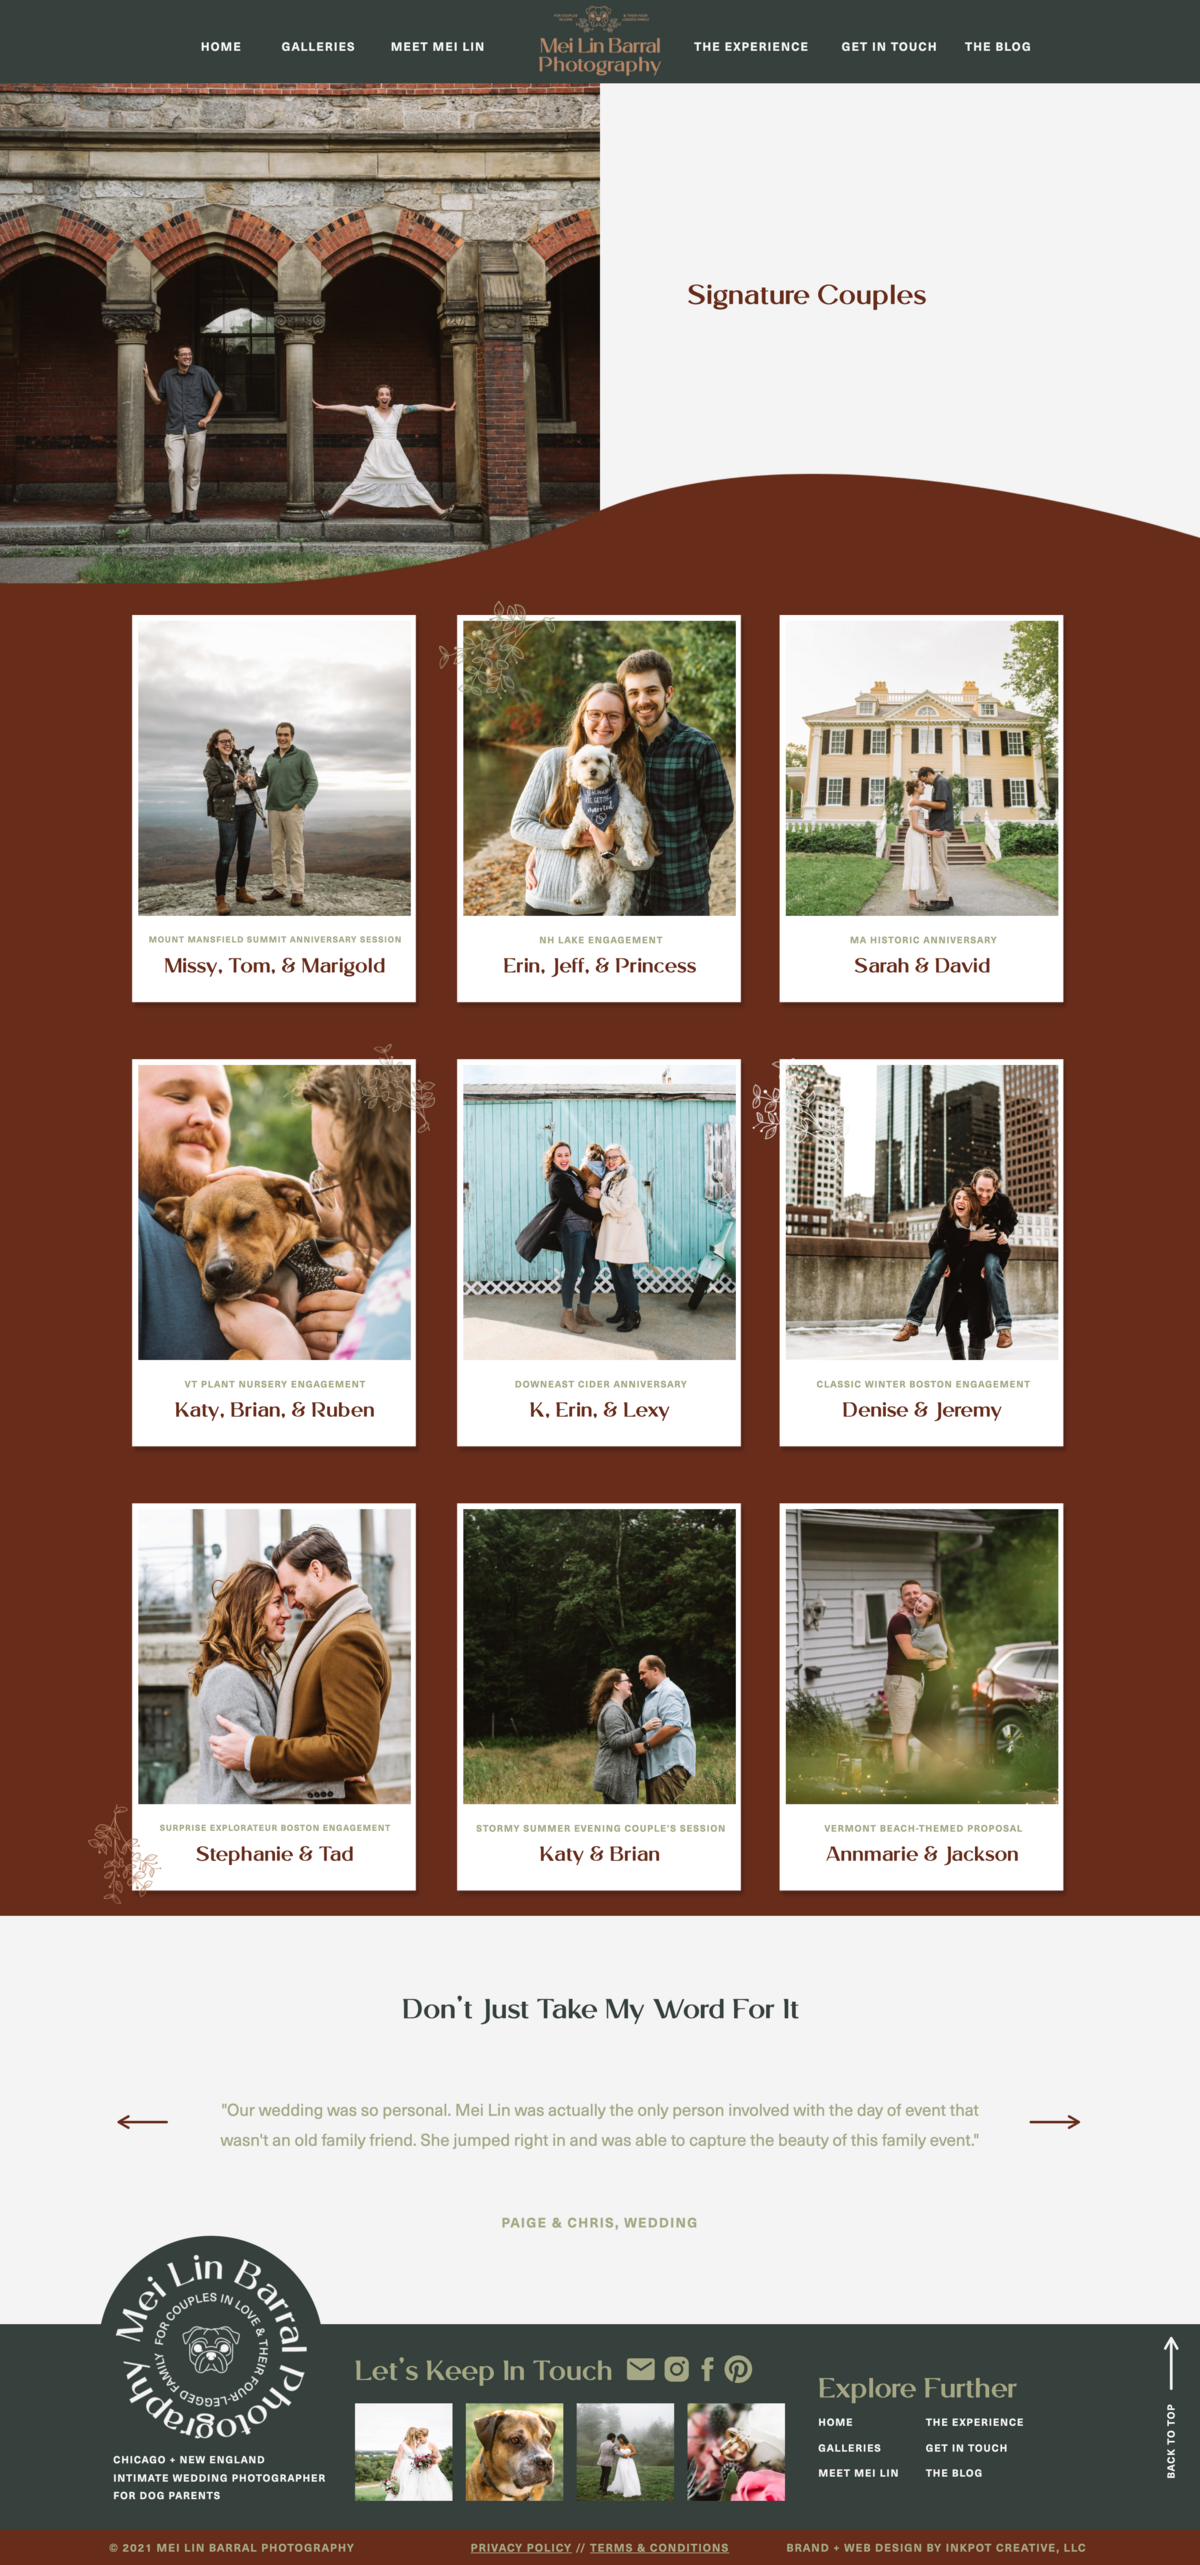 screenshot of full couples gallery page